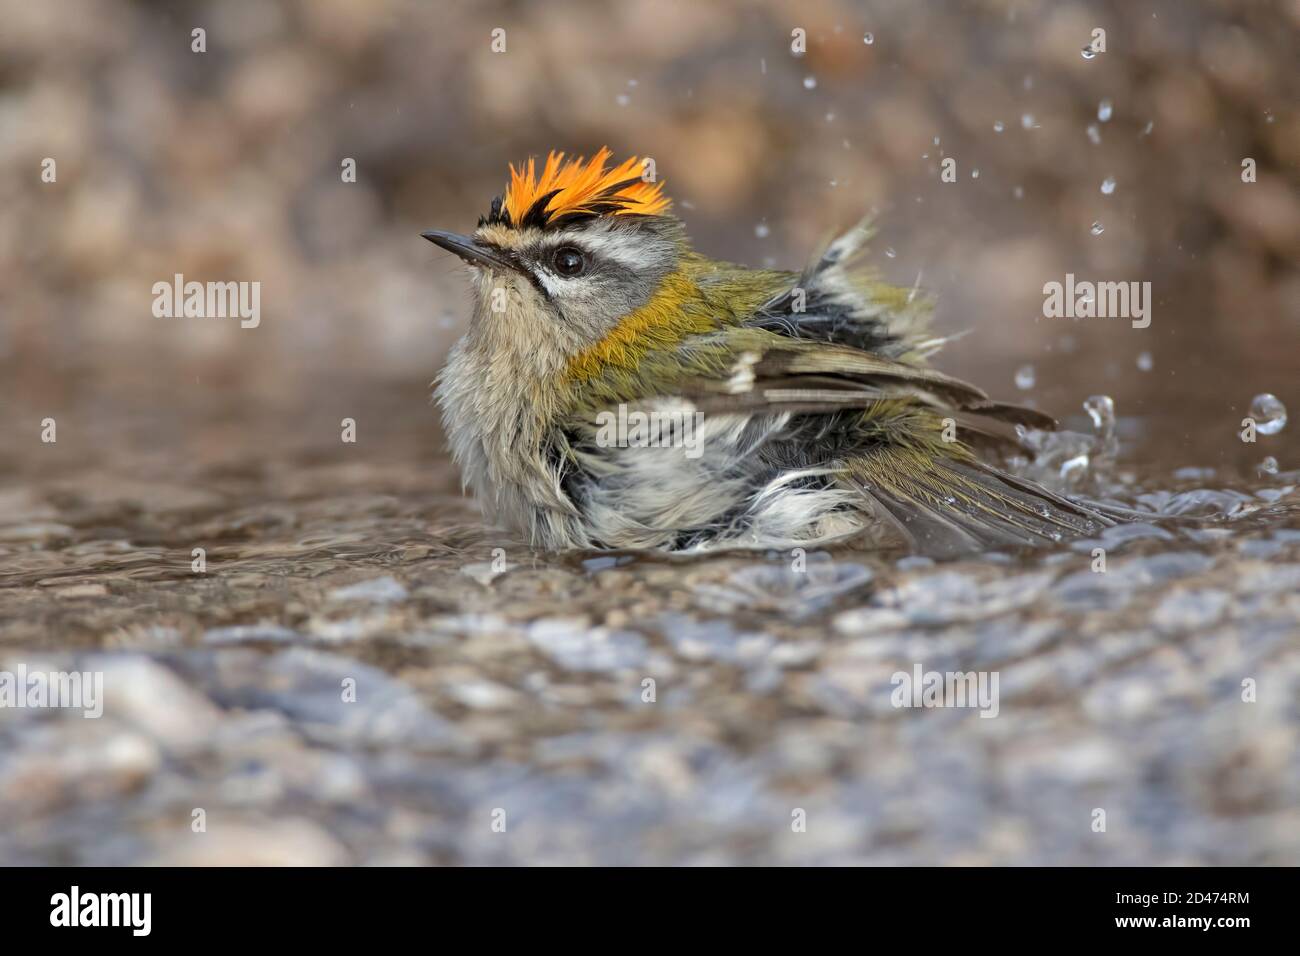 A fire crest takes a shower Stock Photo